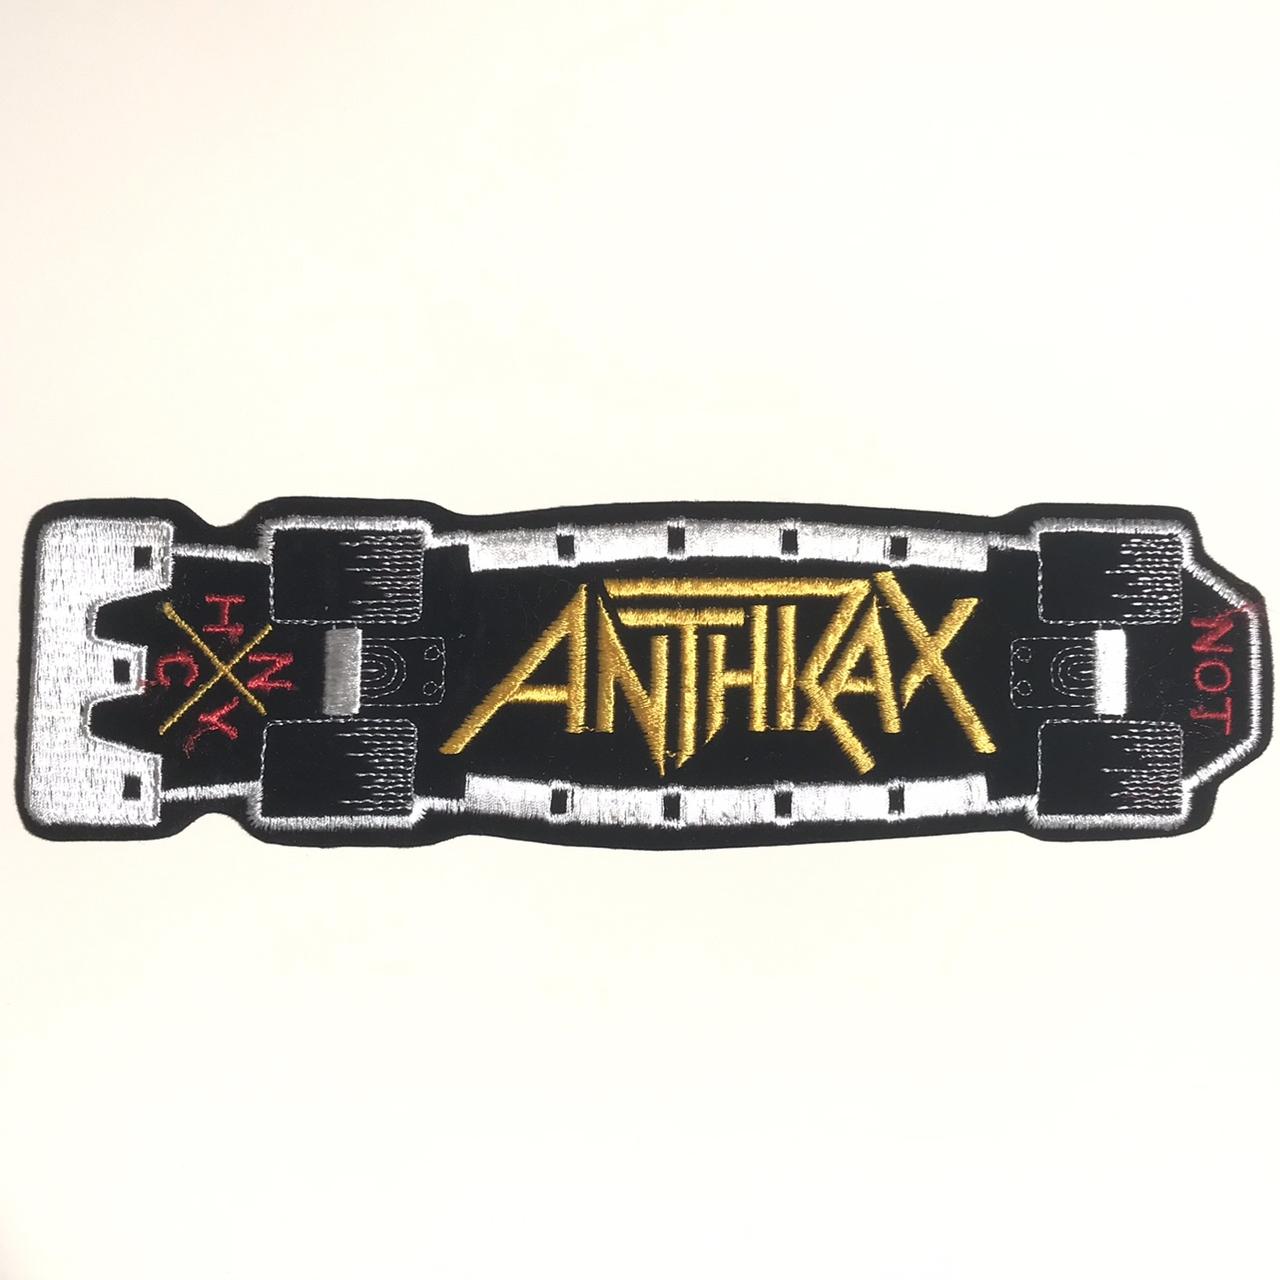 anthrax patch, does anyone know where i could find one or is